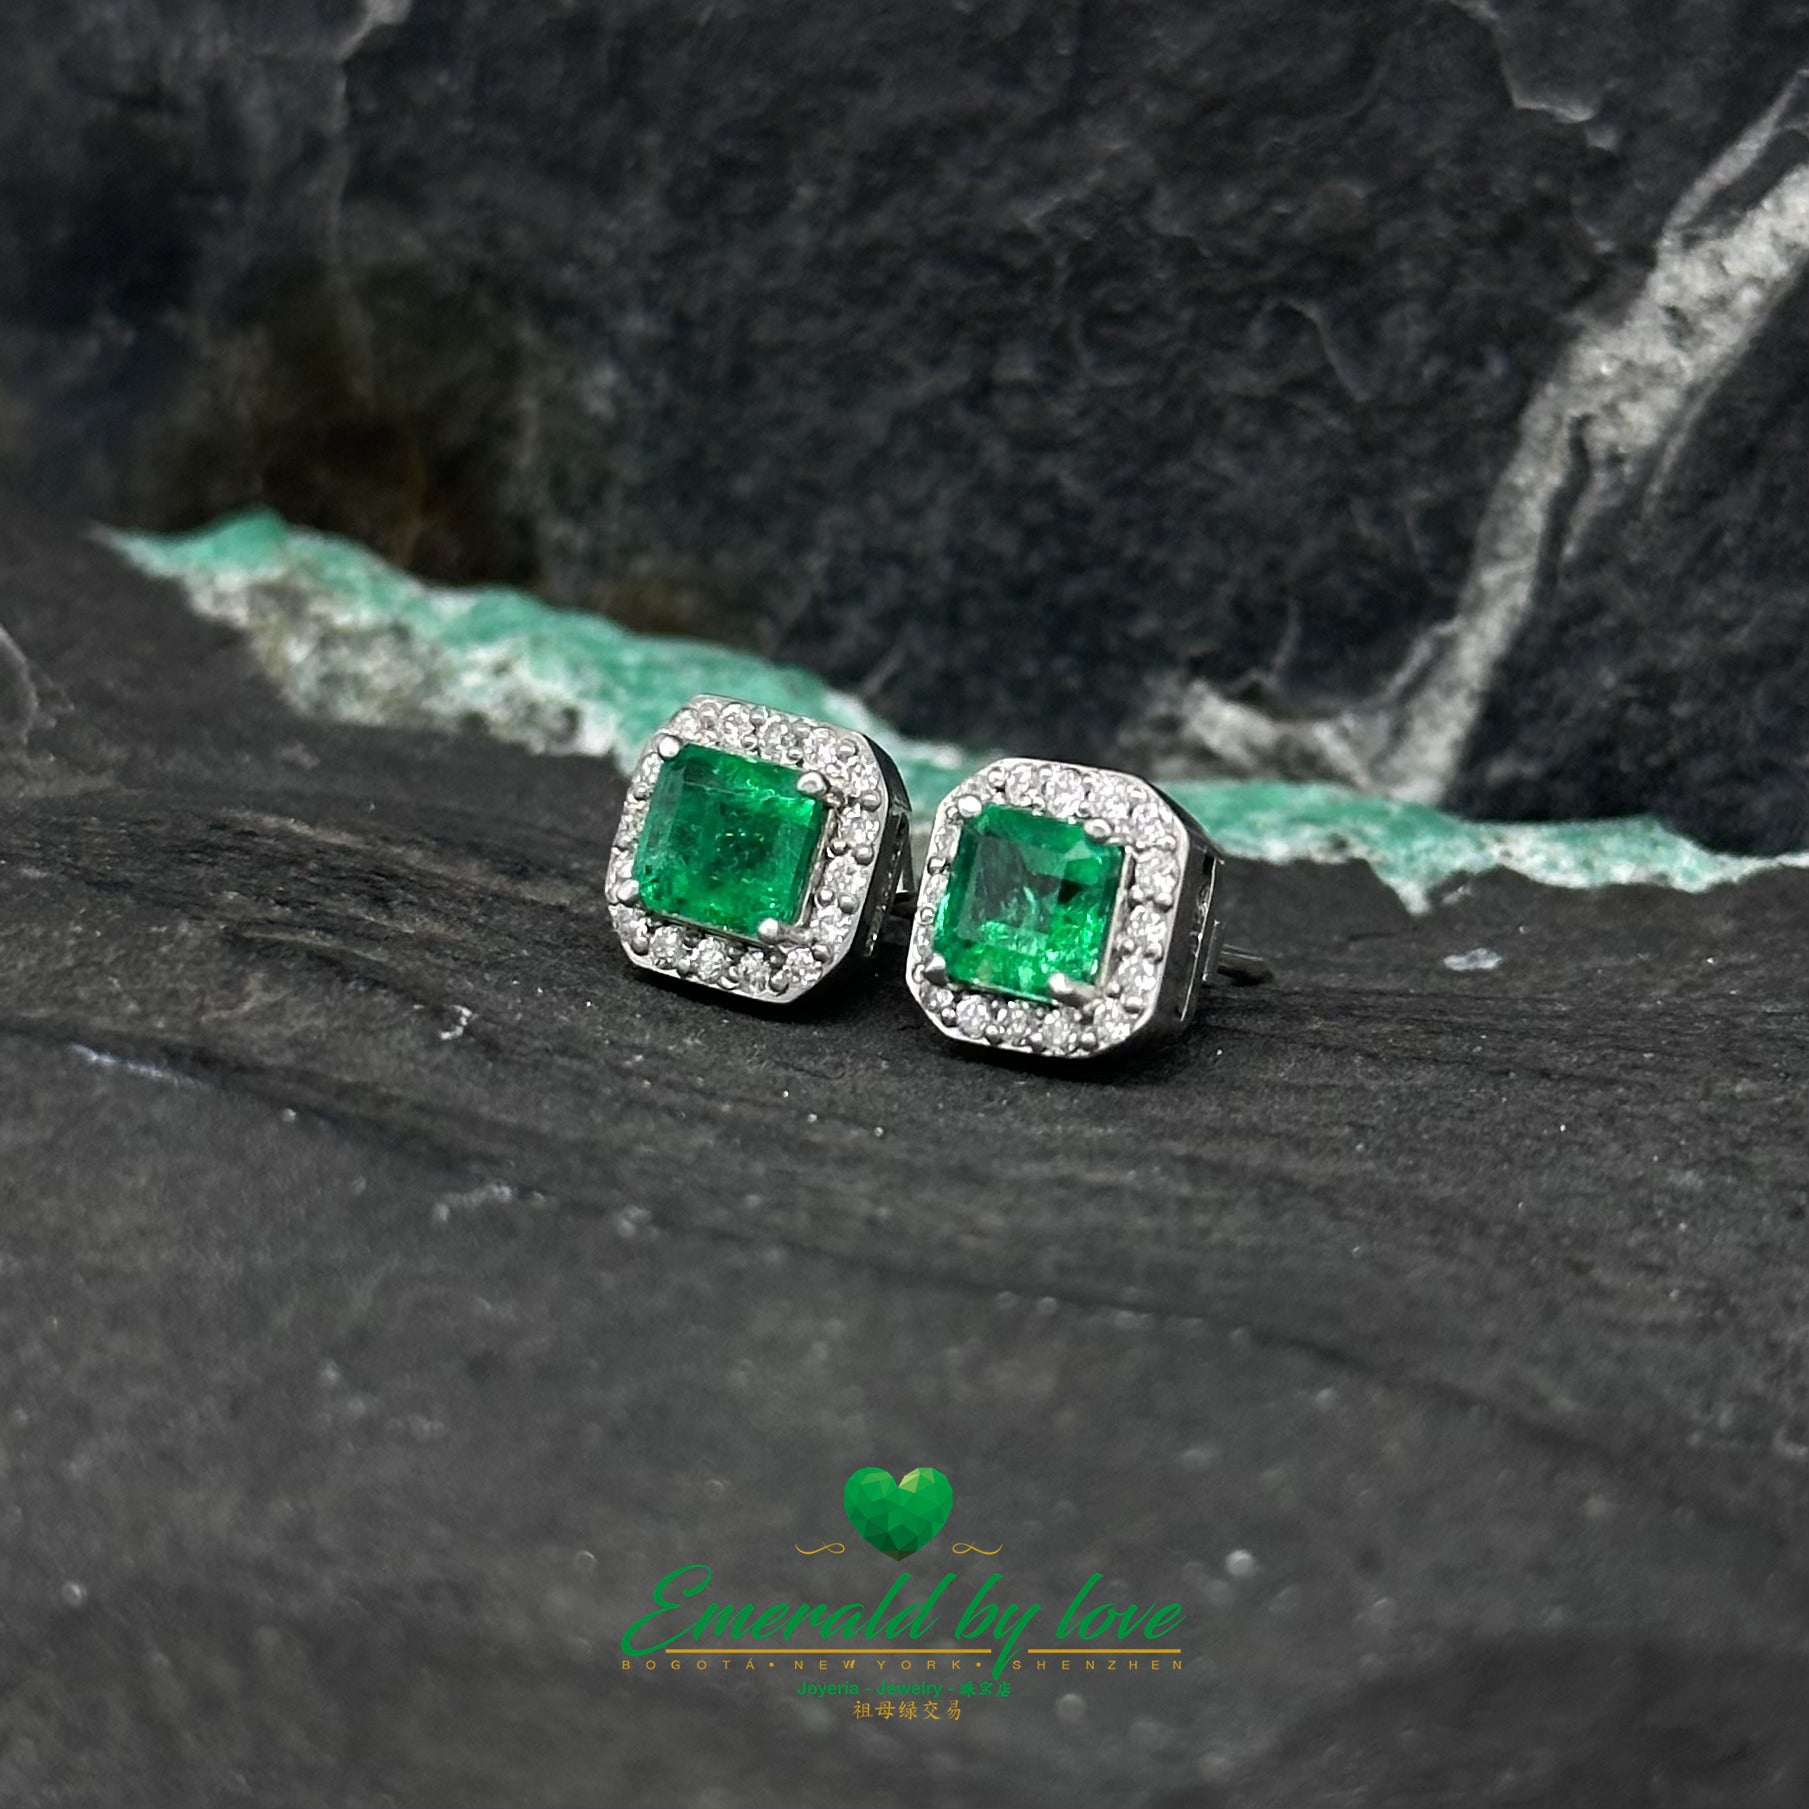 Square Emerald and Diamond Earrings in White Gold: Timeless Elegance